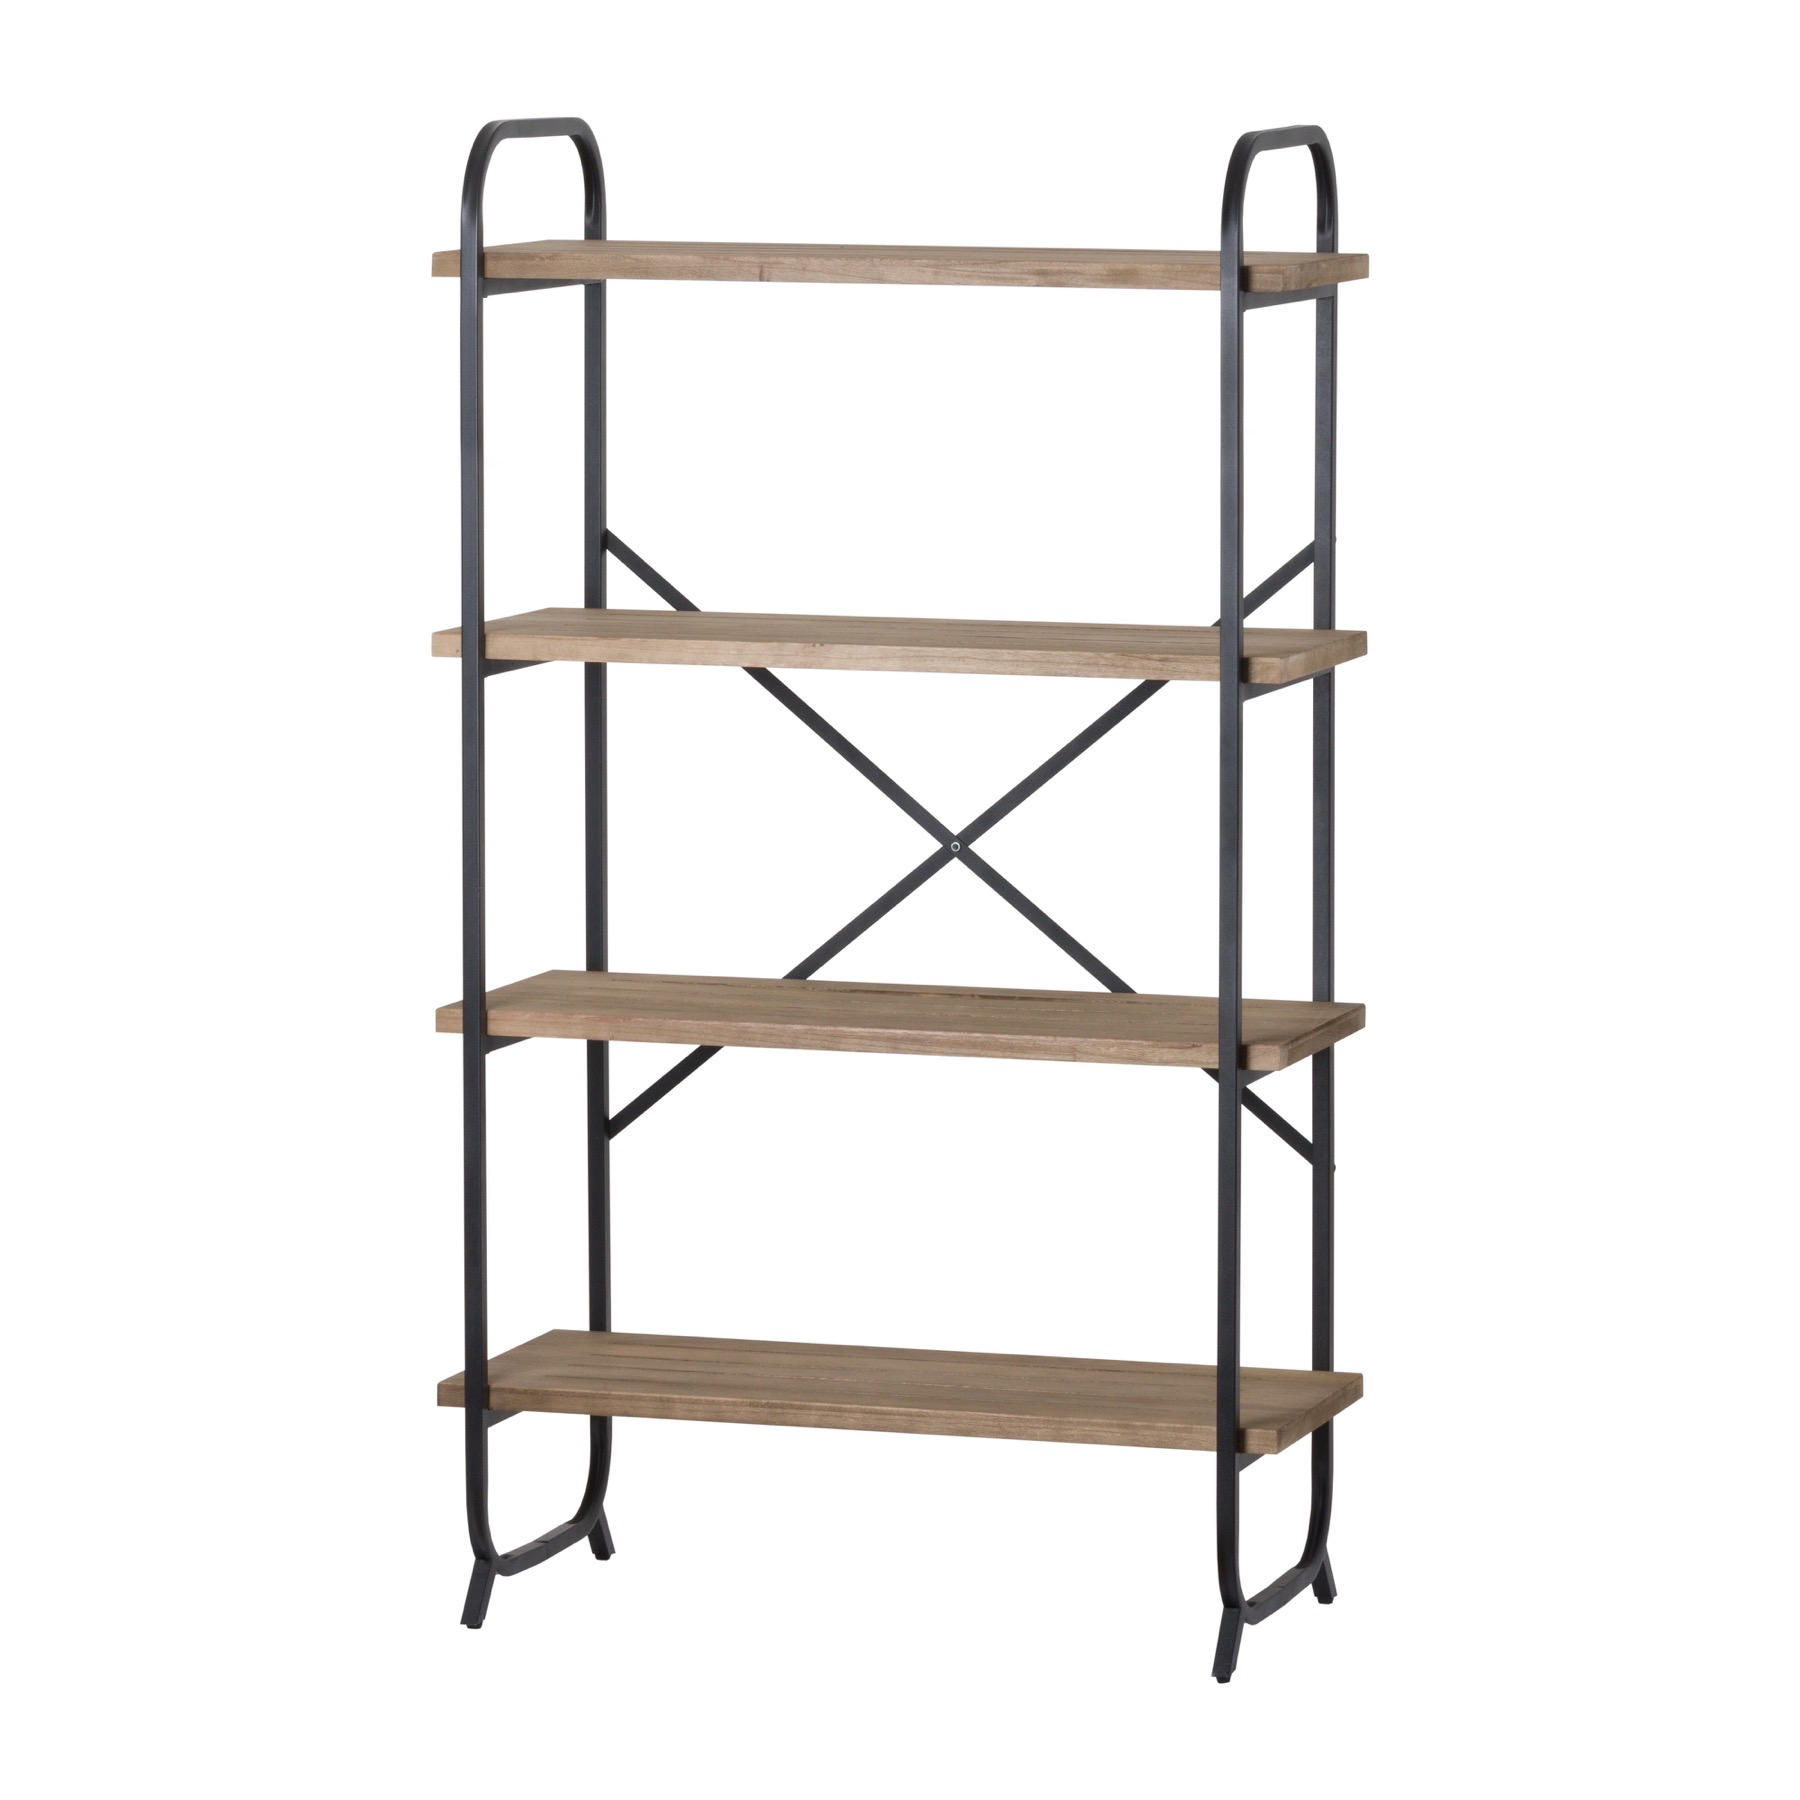 Four Tier Shelf Cross Section Industrial Display Unit - Image 1